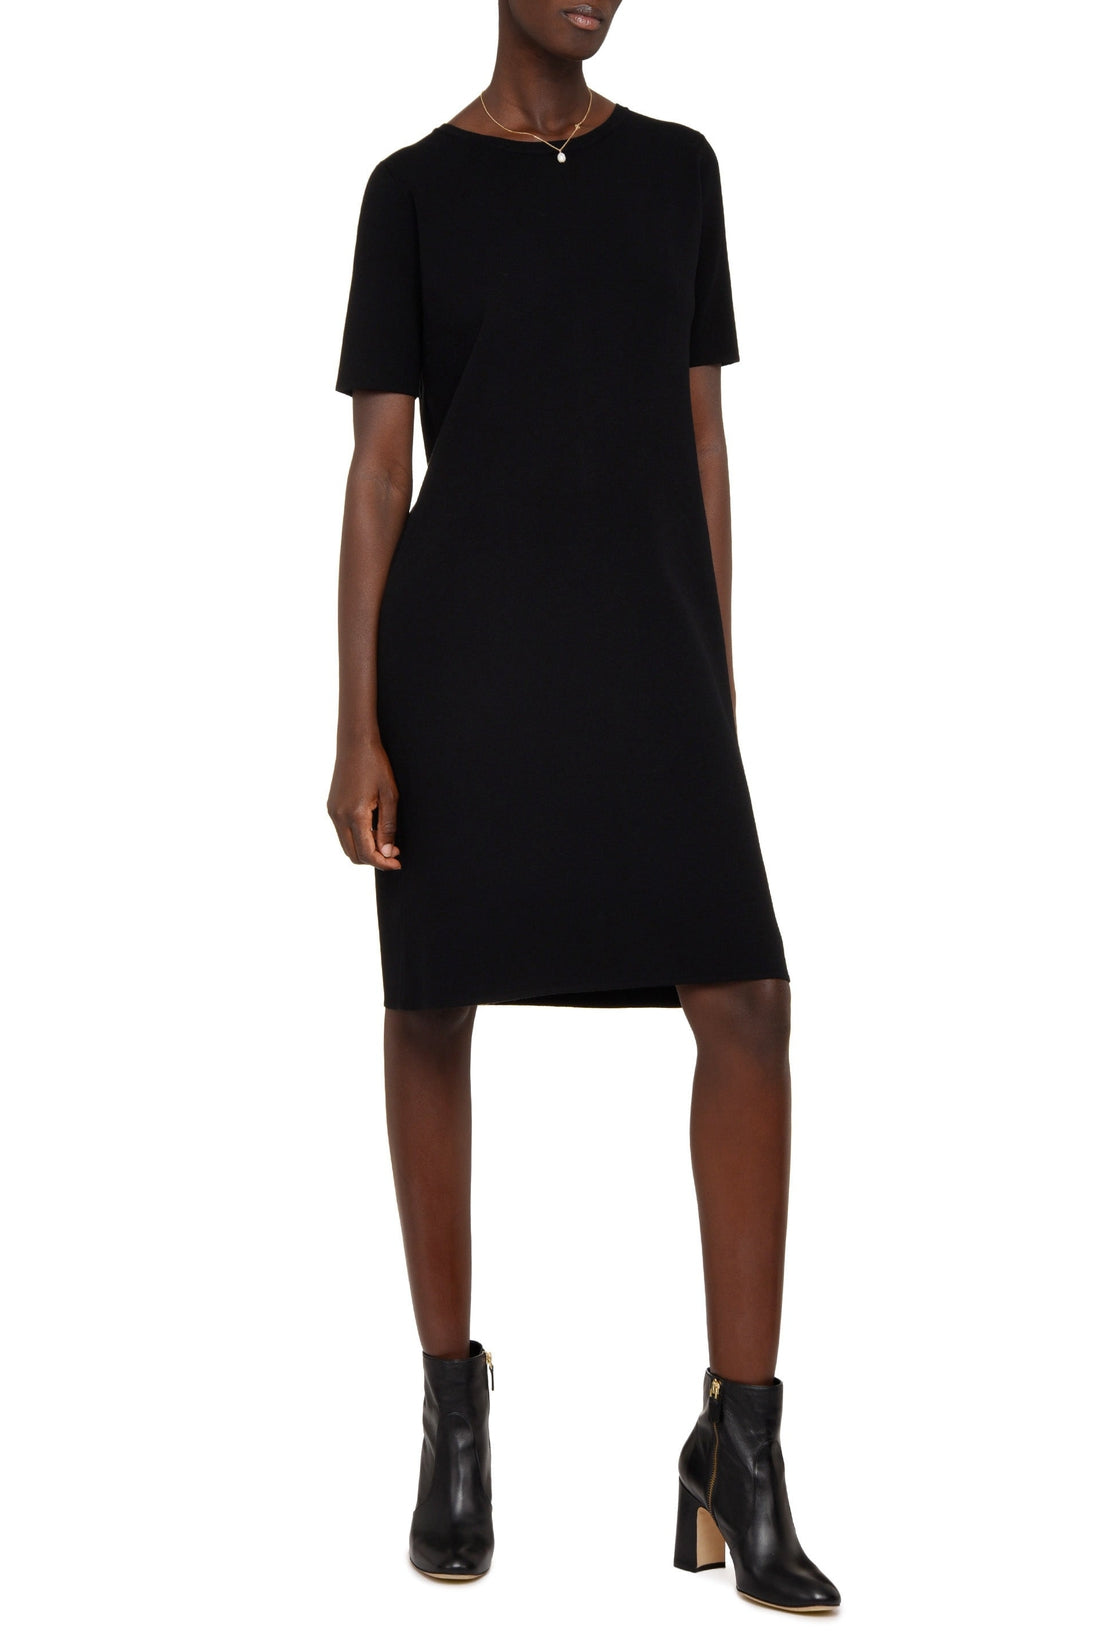 Max Mara-OUTLET-SALE-Paggi knitted dress-ARCHIVIST